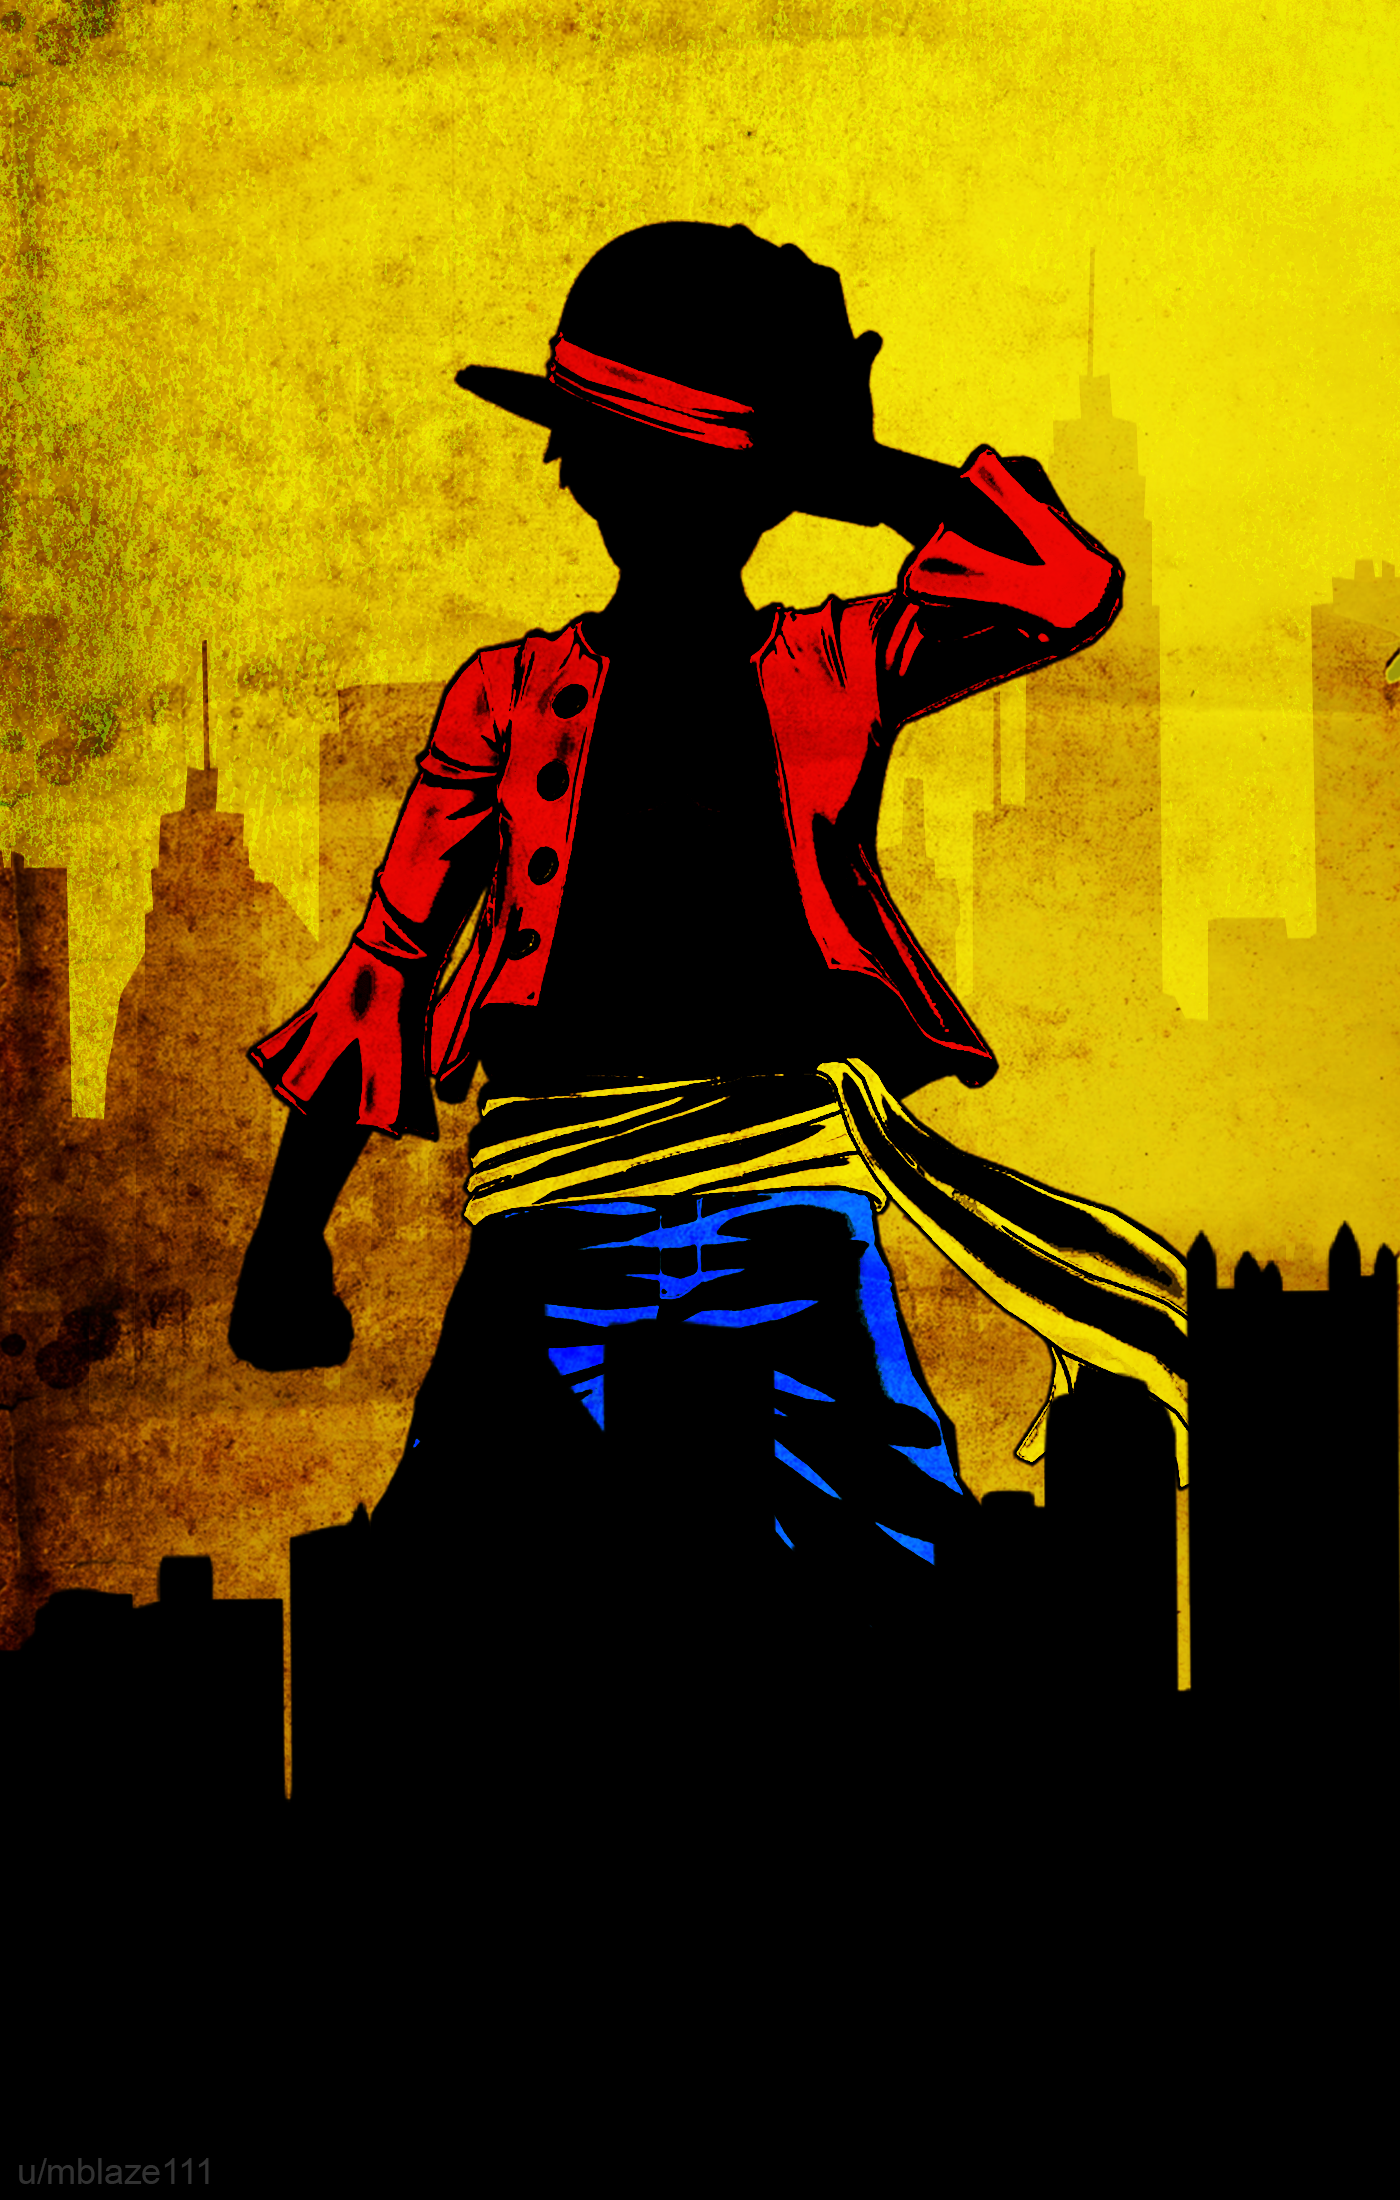 Made a Luffy Wallpaper. Hope you guys like it. Planning to make Zoro next!